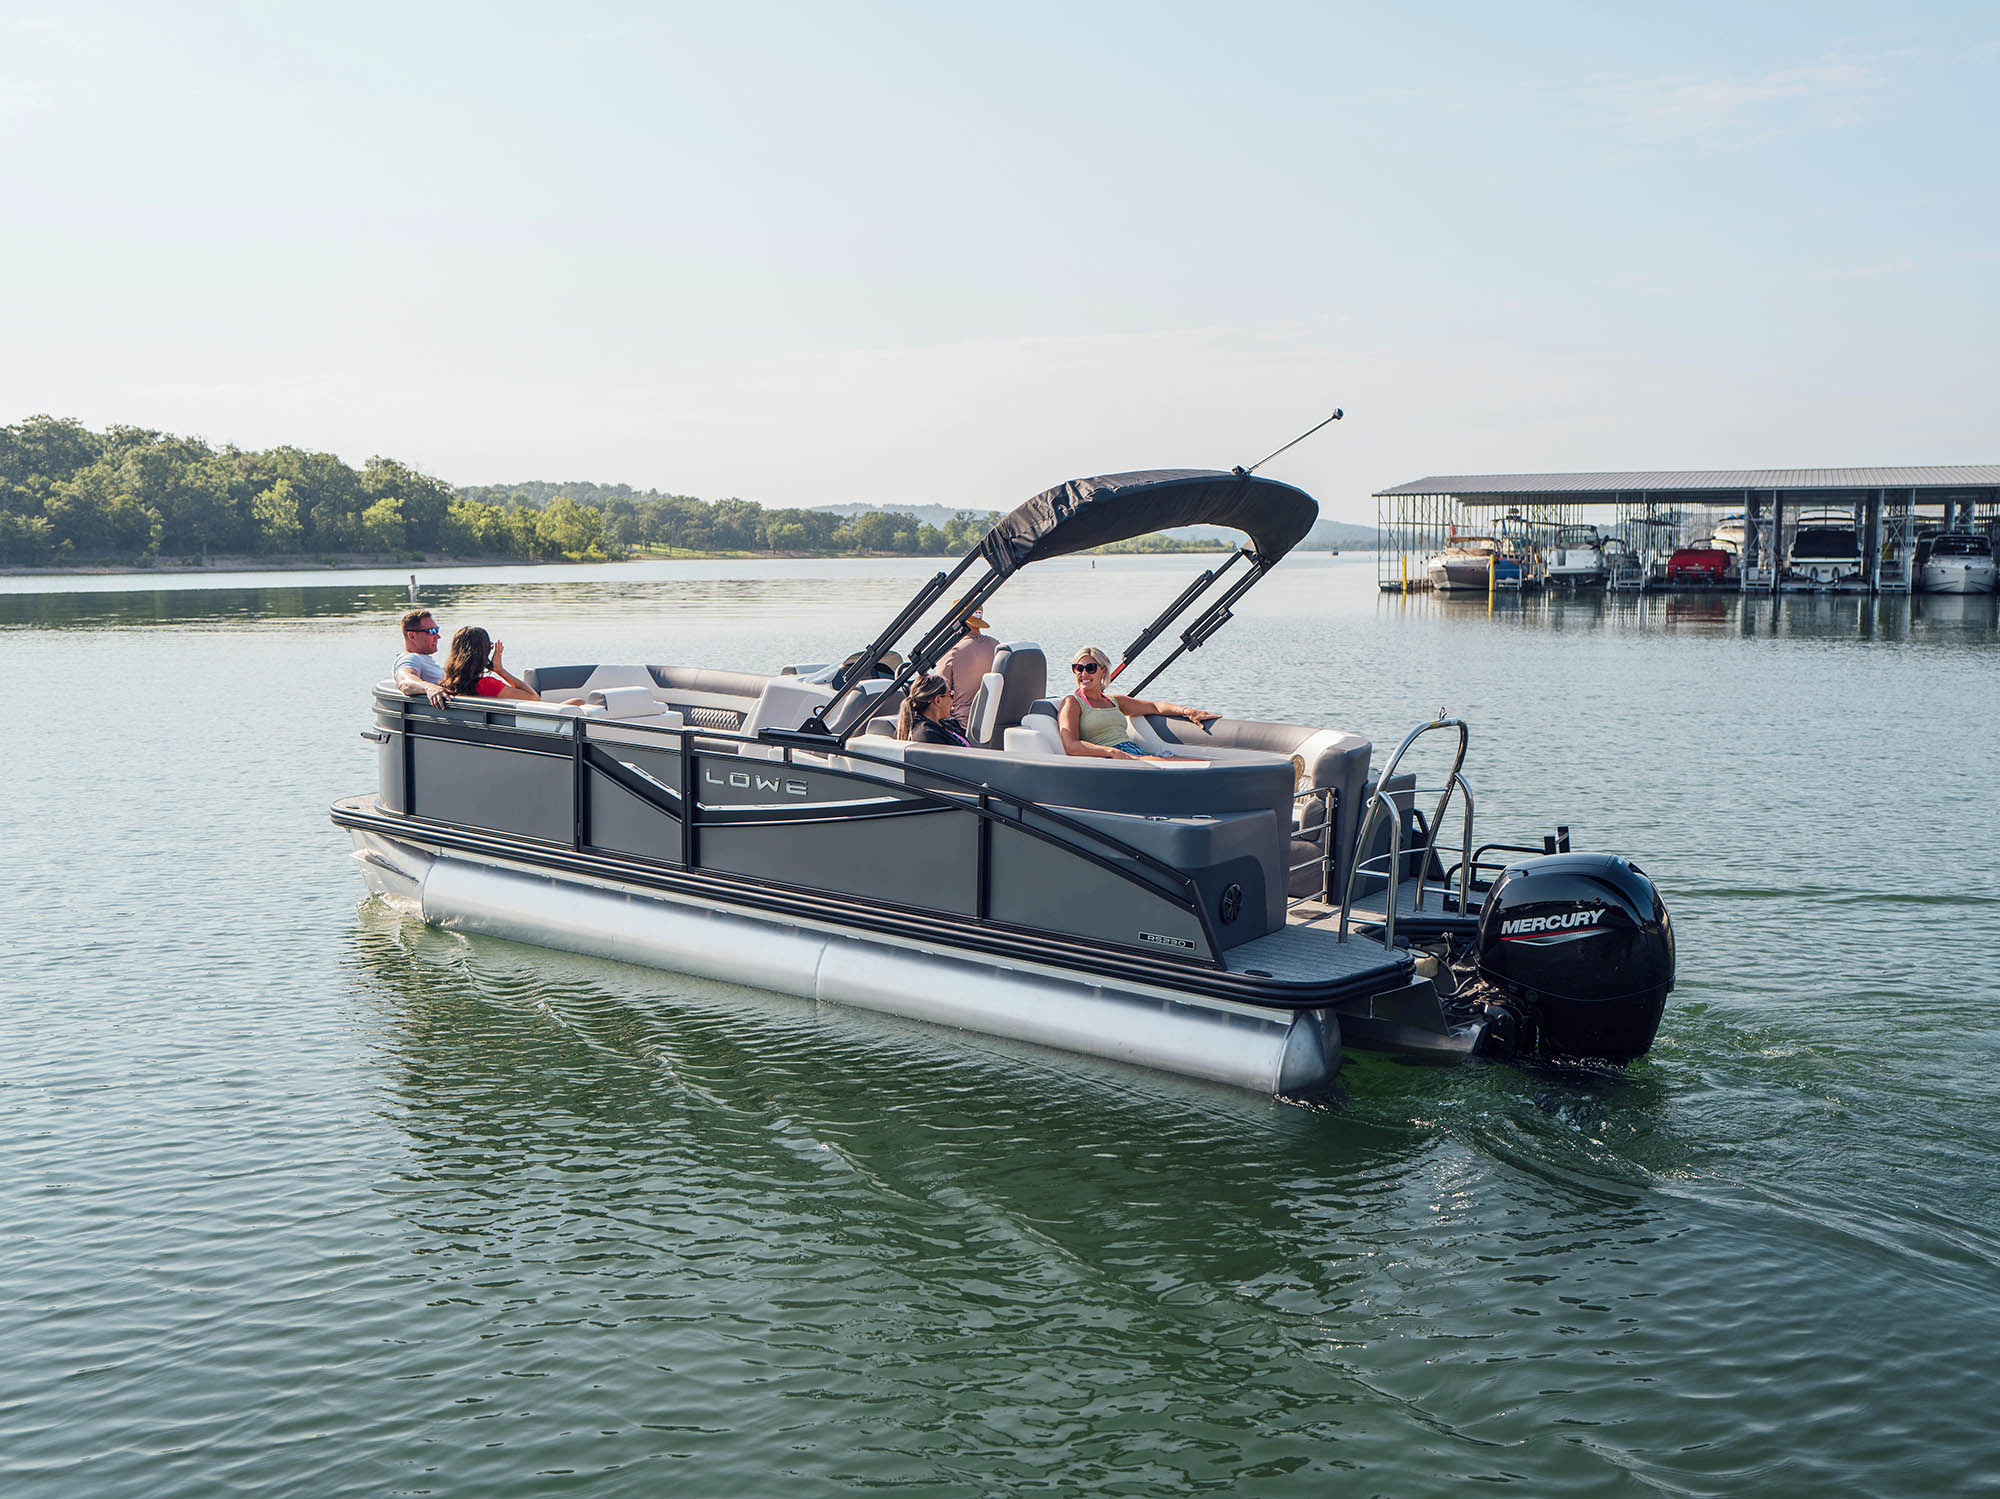 Pontoon Boats for Fishing, Cruising and Water Sports